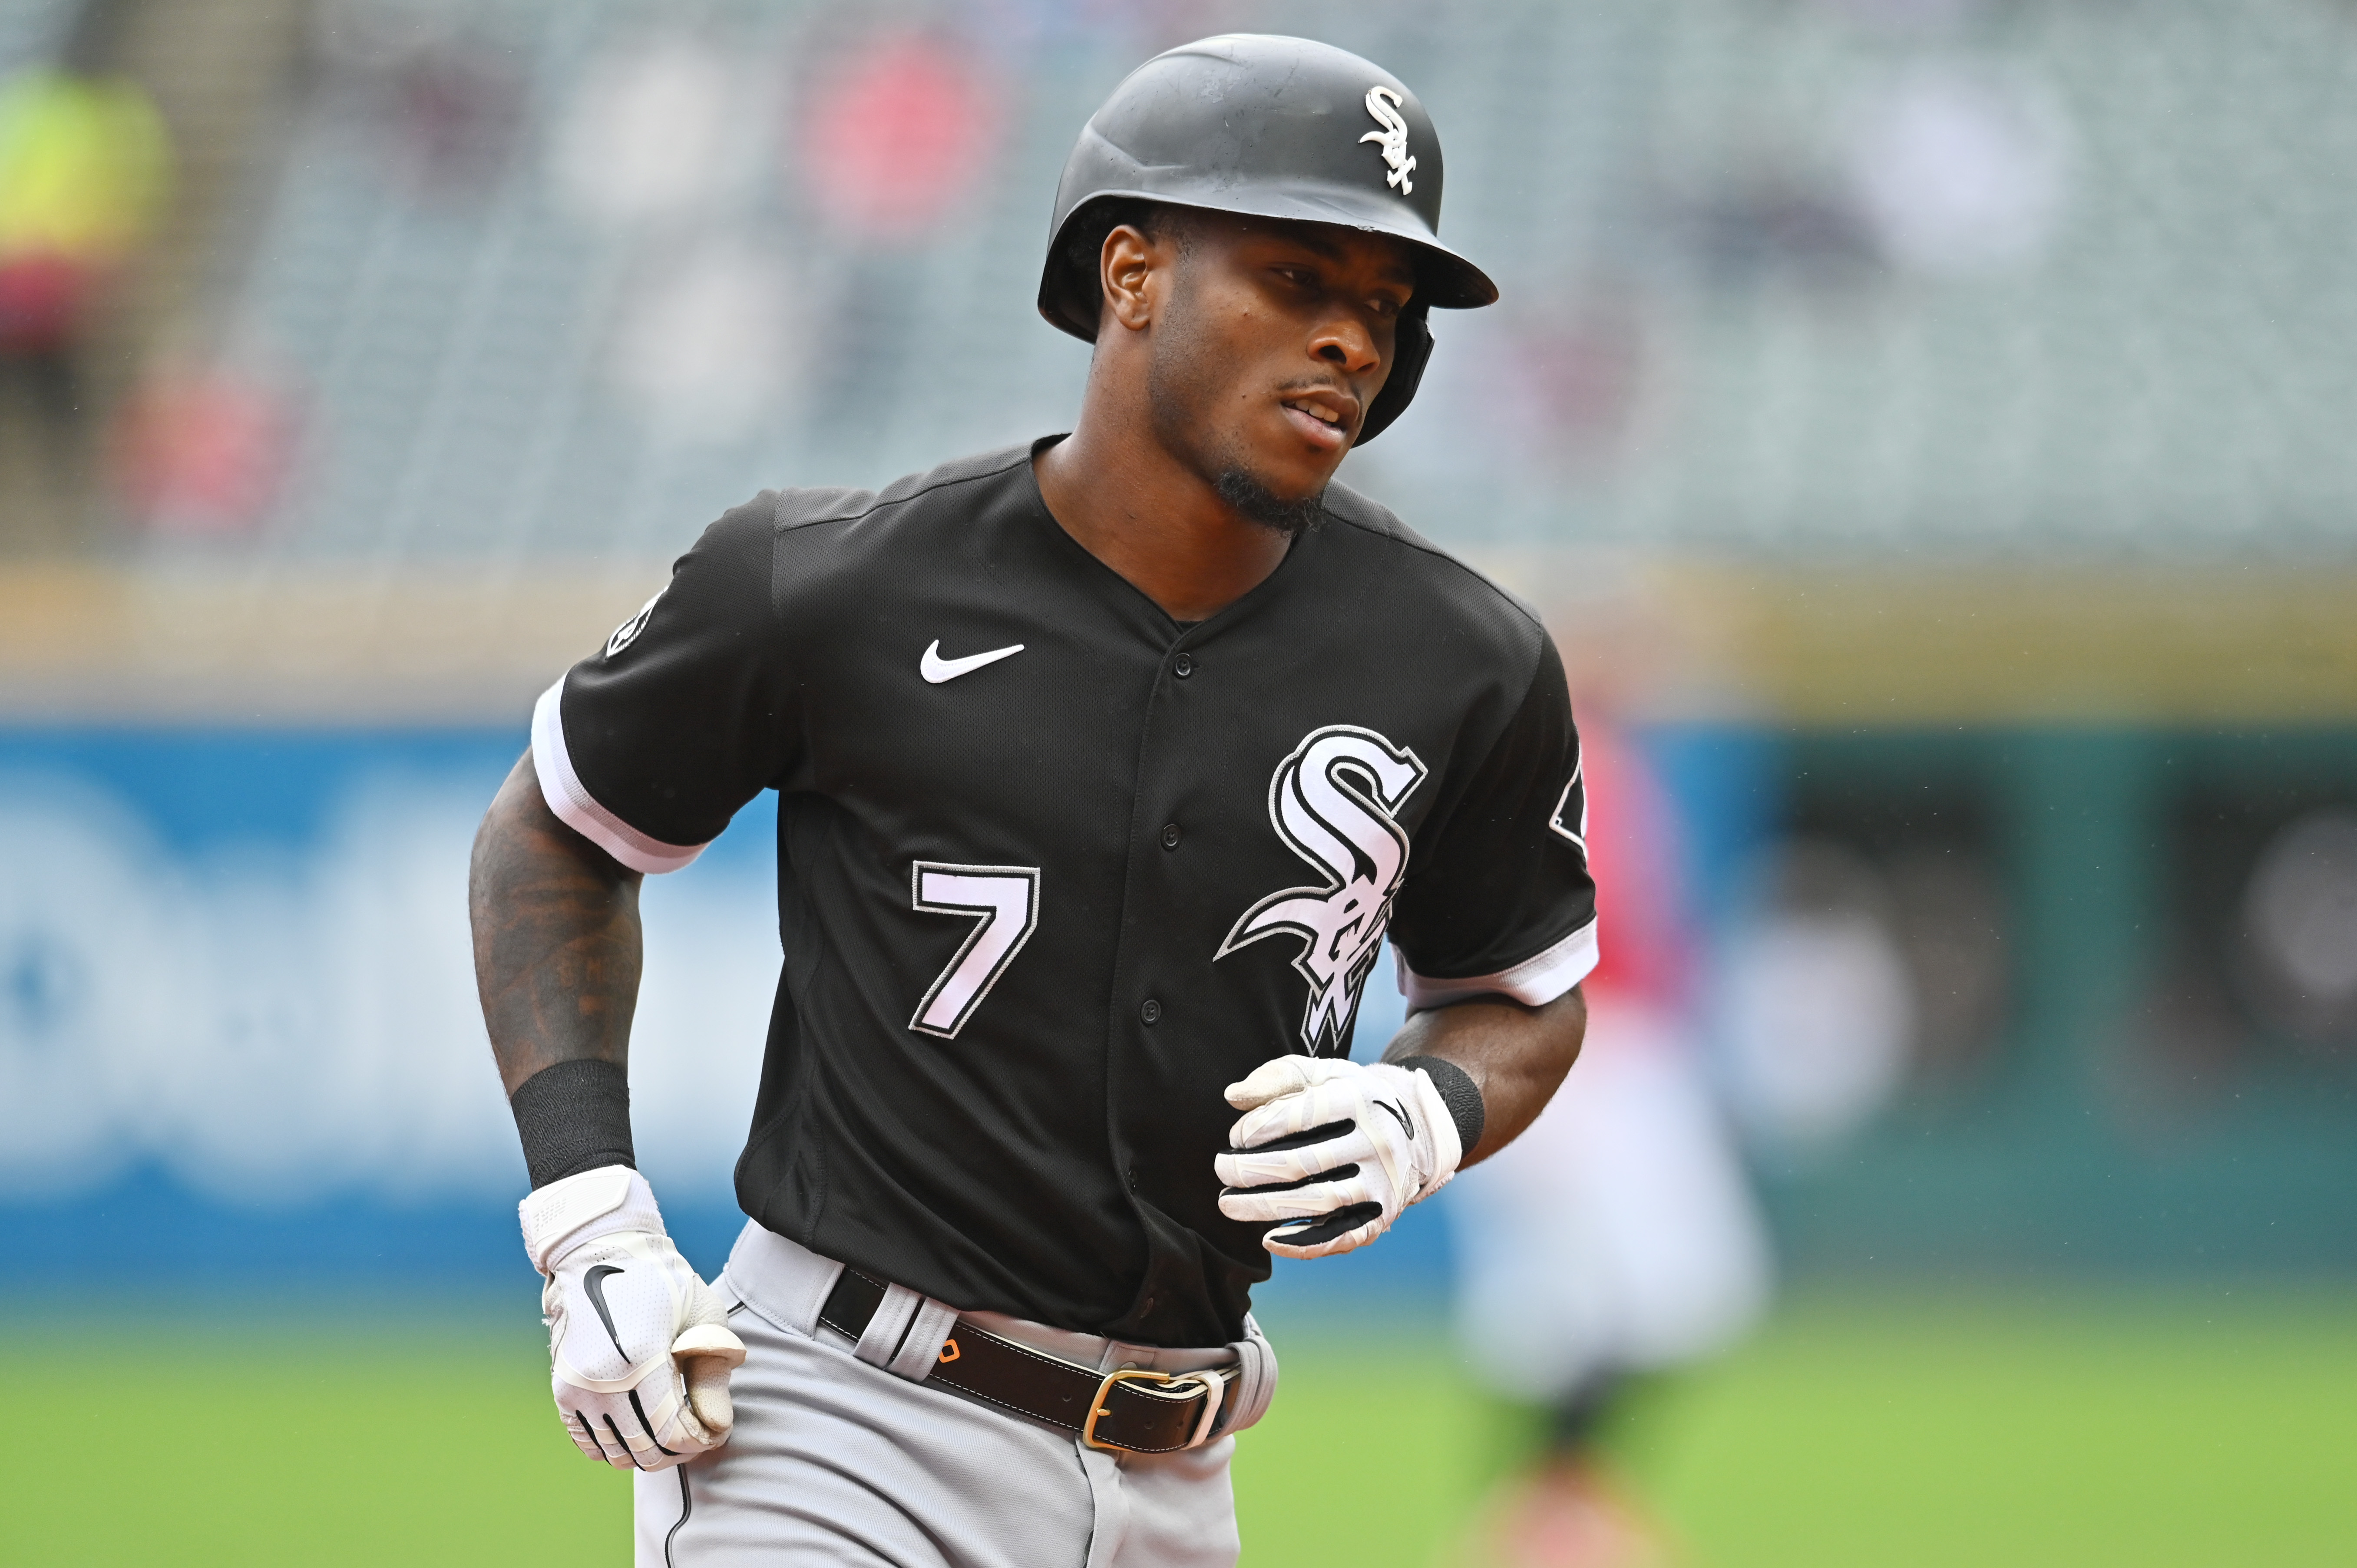 MLB: Game One-Chicago White Sox at Cleveland Indians